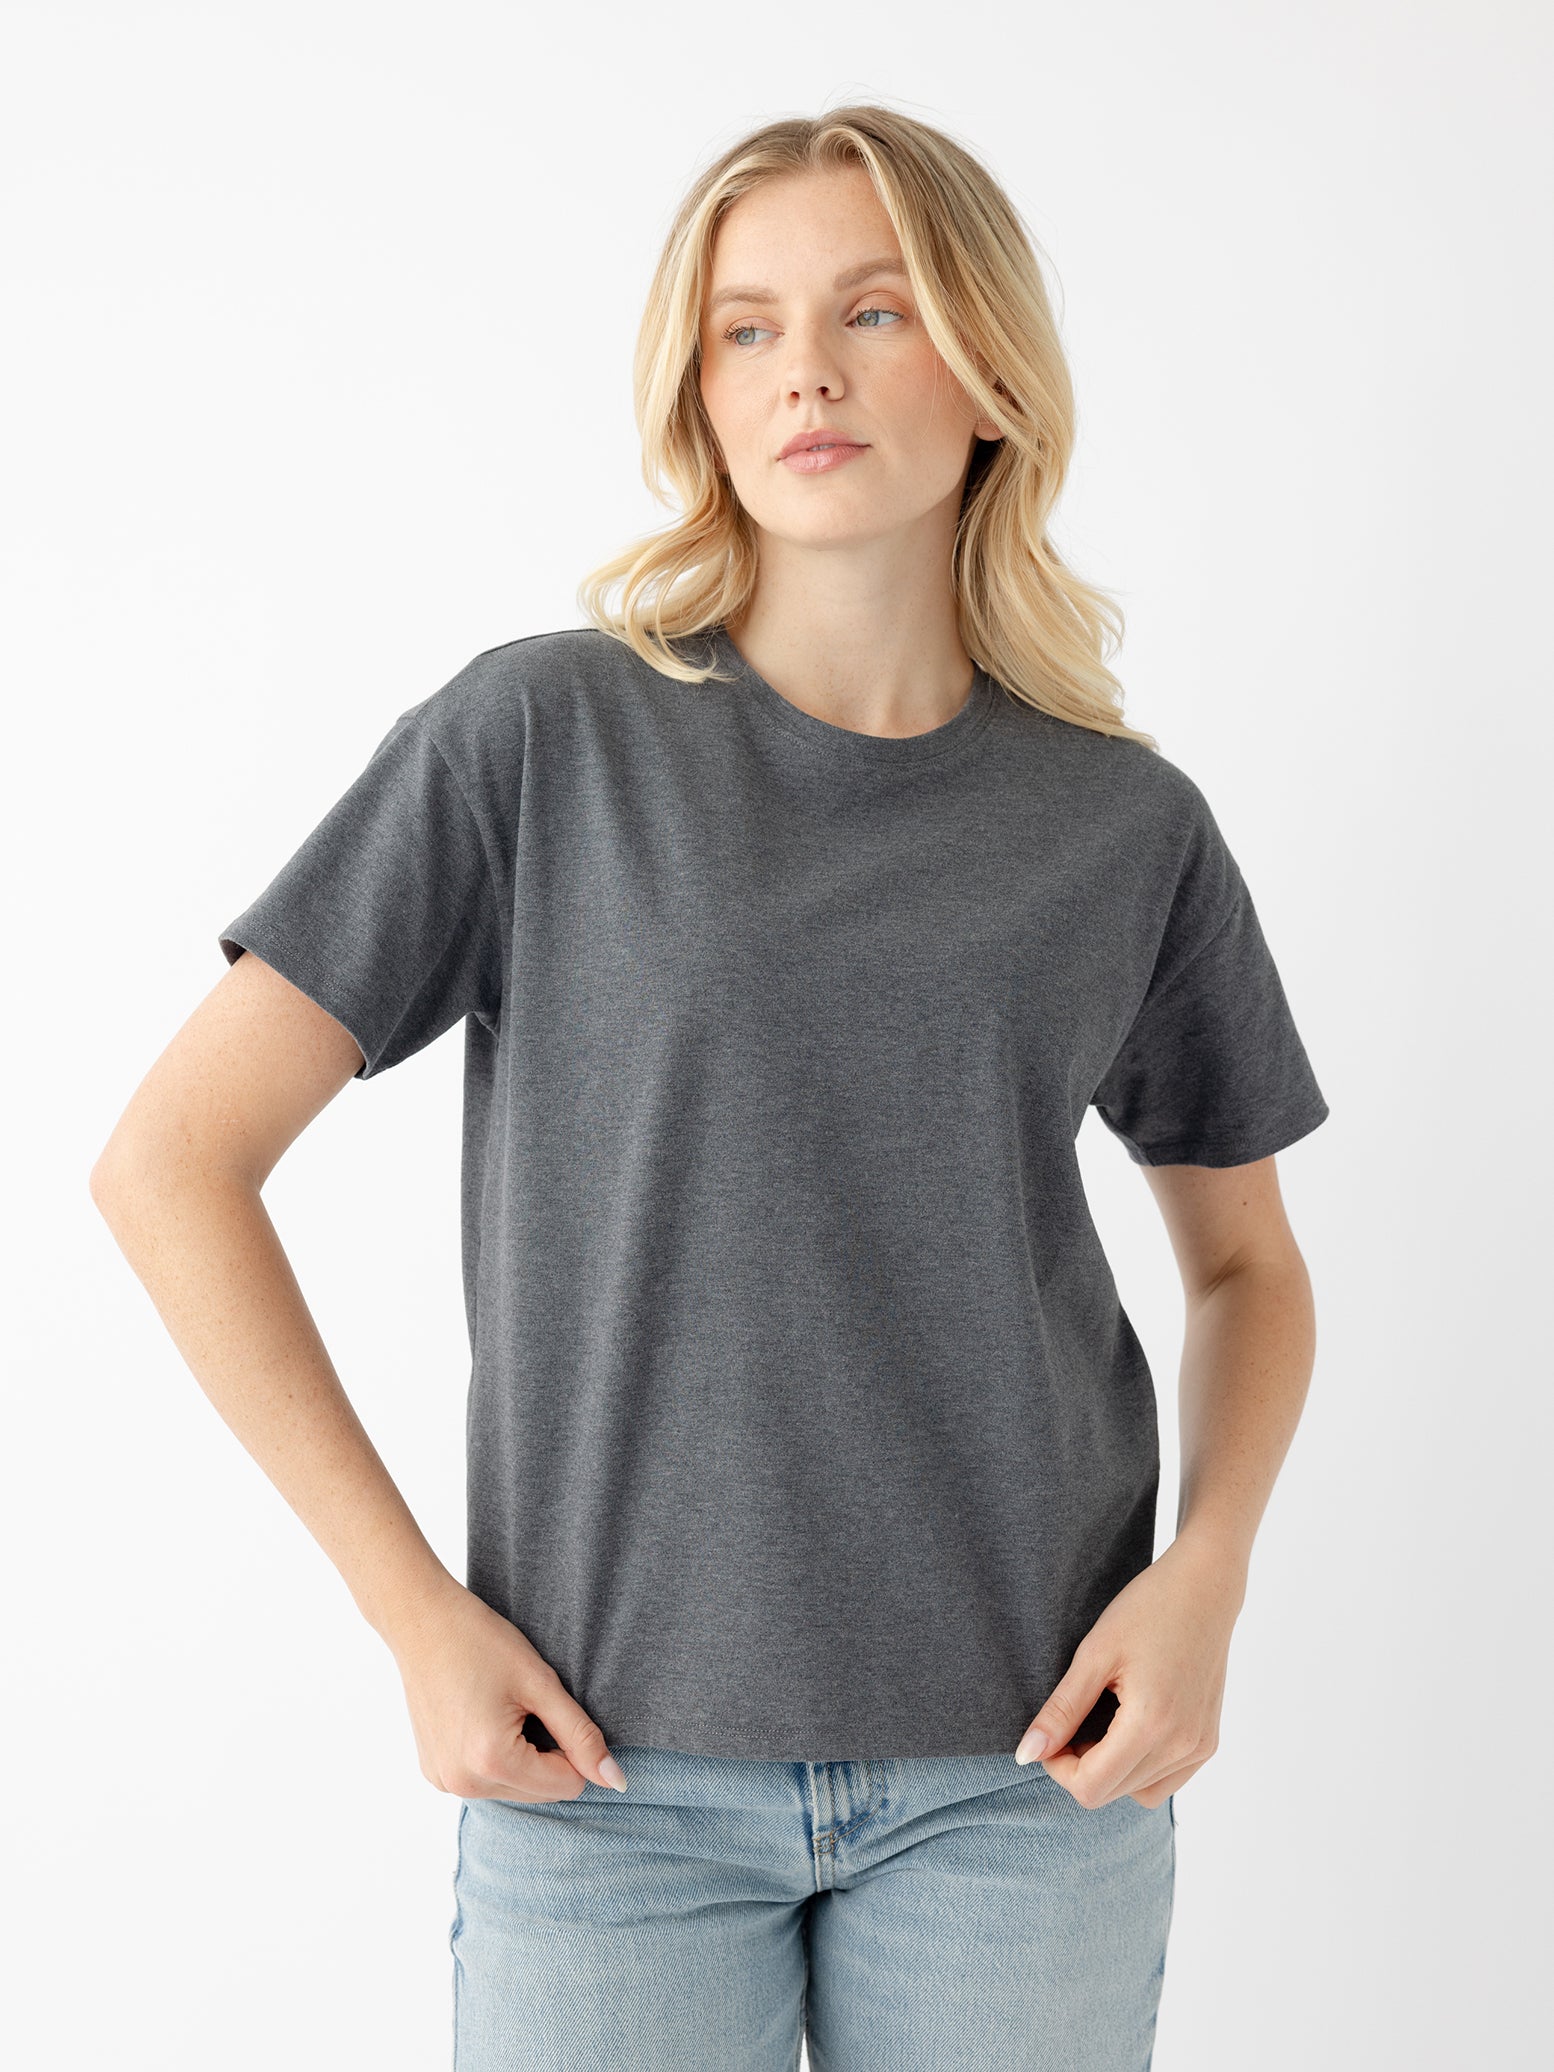 Woman wearing coal heather tee with white background |Color:Coal Heather